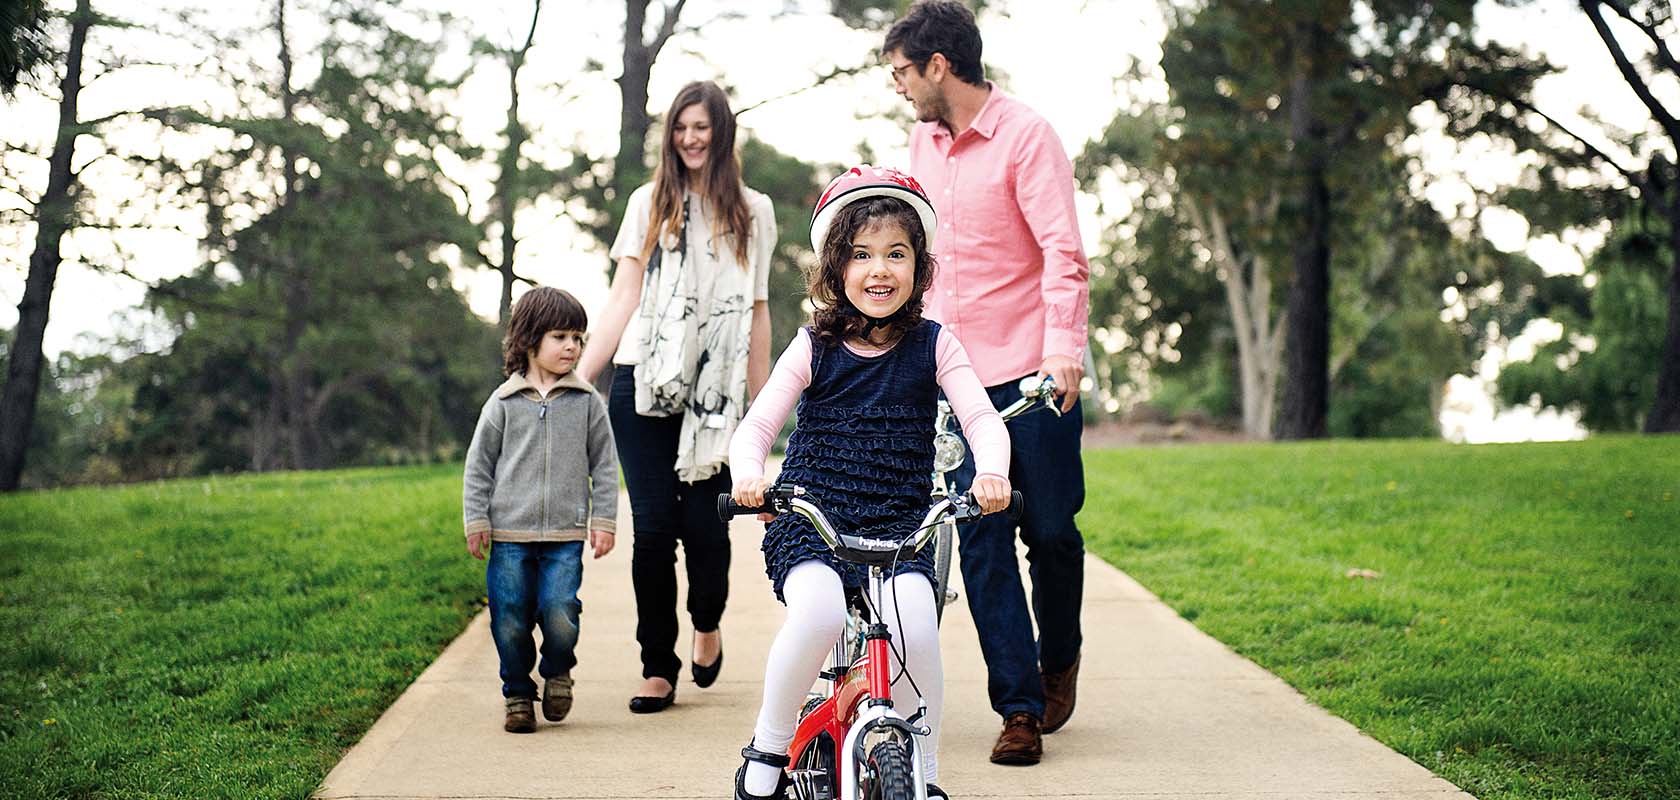 Young girl riding bike with her parents and younger sibling walking behind